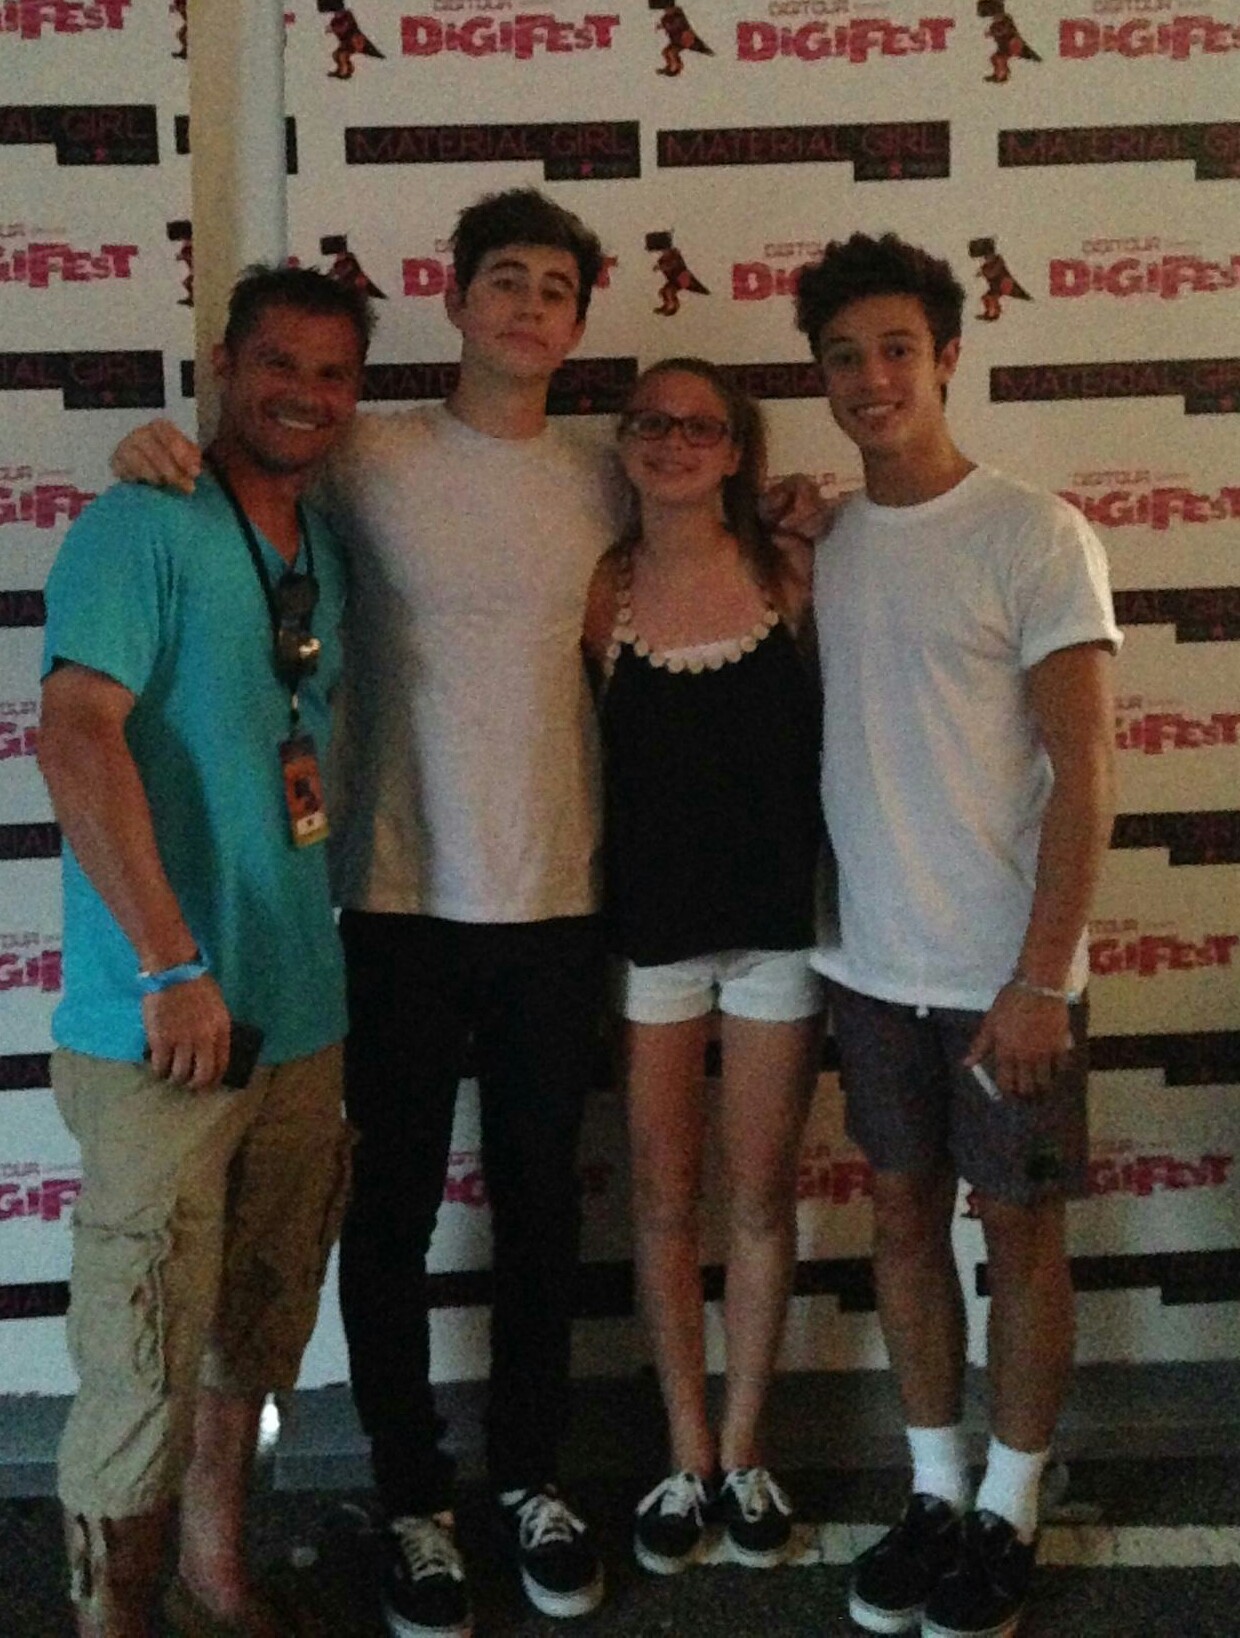 Jerry Lobrow at DigiFest NYC with Cameron Dallas, Olivia & Nash Grier